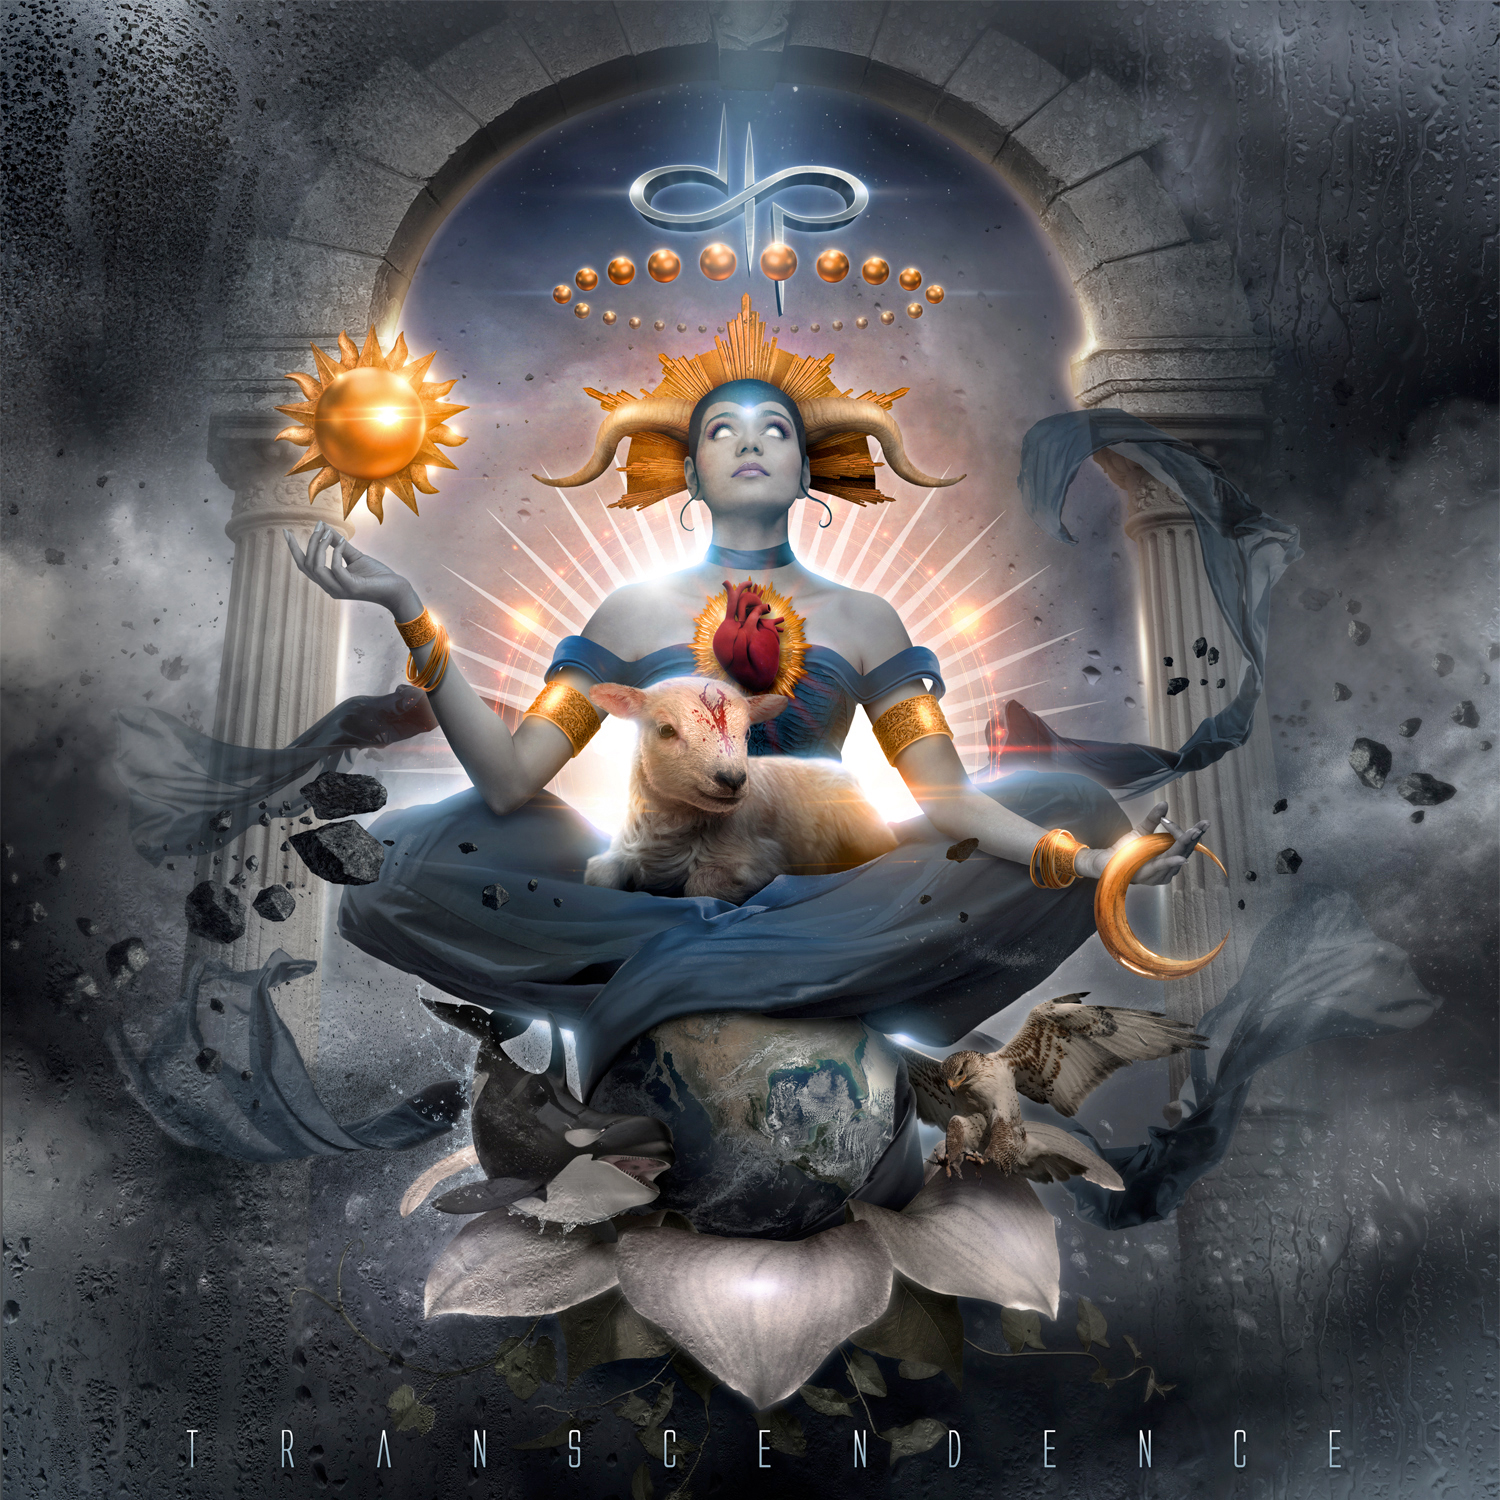 Devin Townsend Project - Transcendence (Century Media)